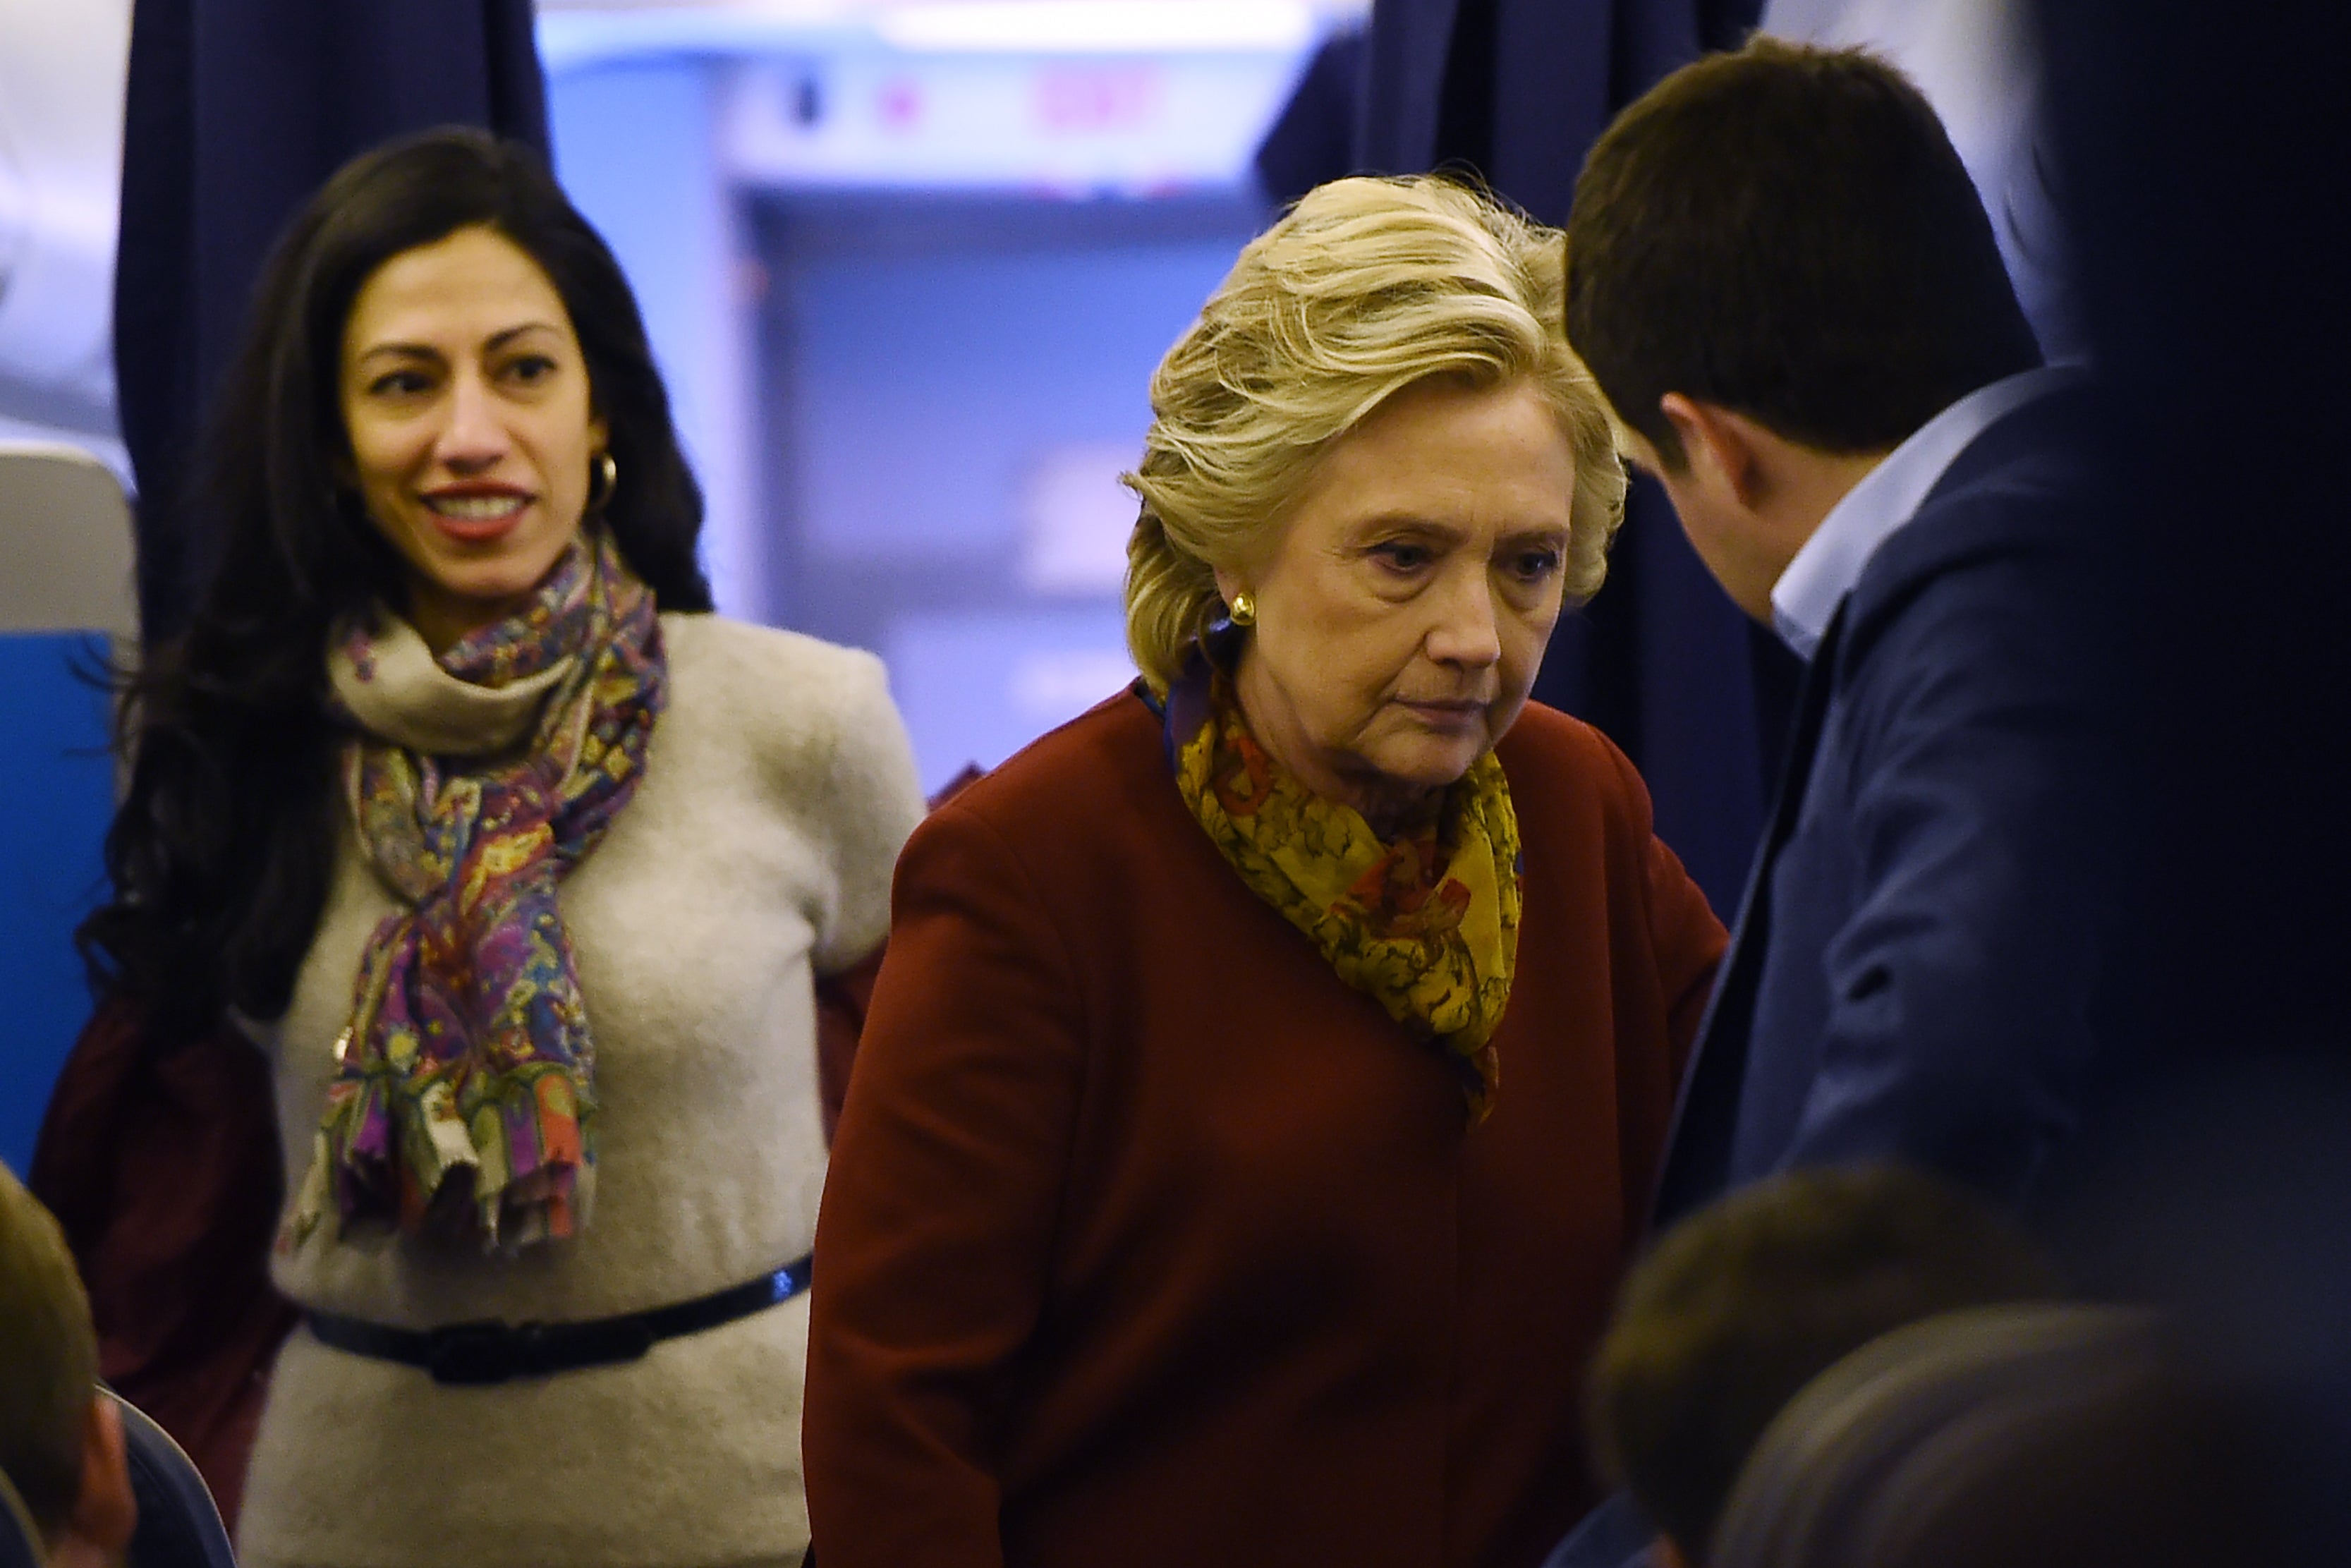 Huma Abedin with Hillary Clinton on the 2016 presidential campaign trail